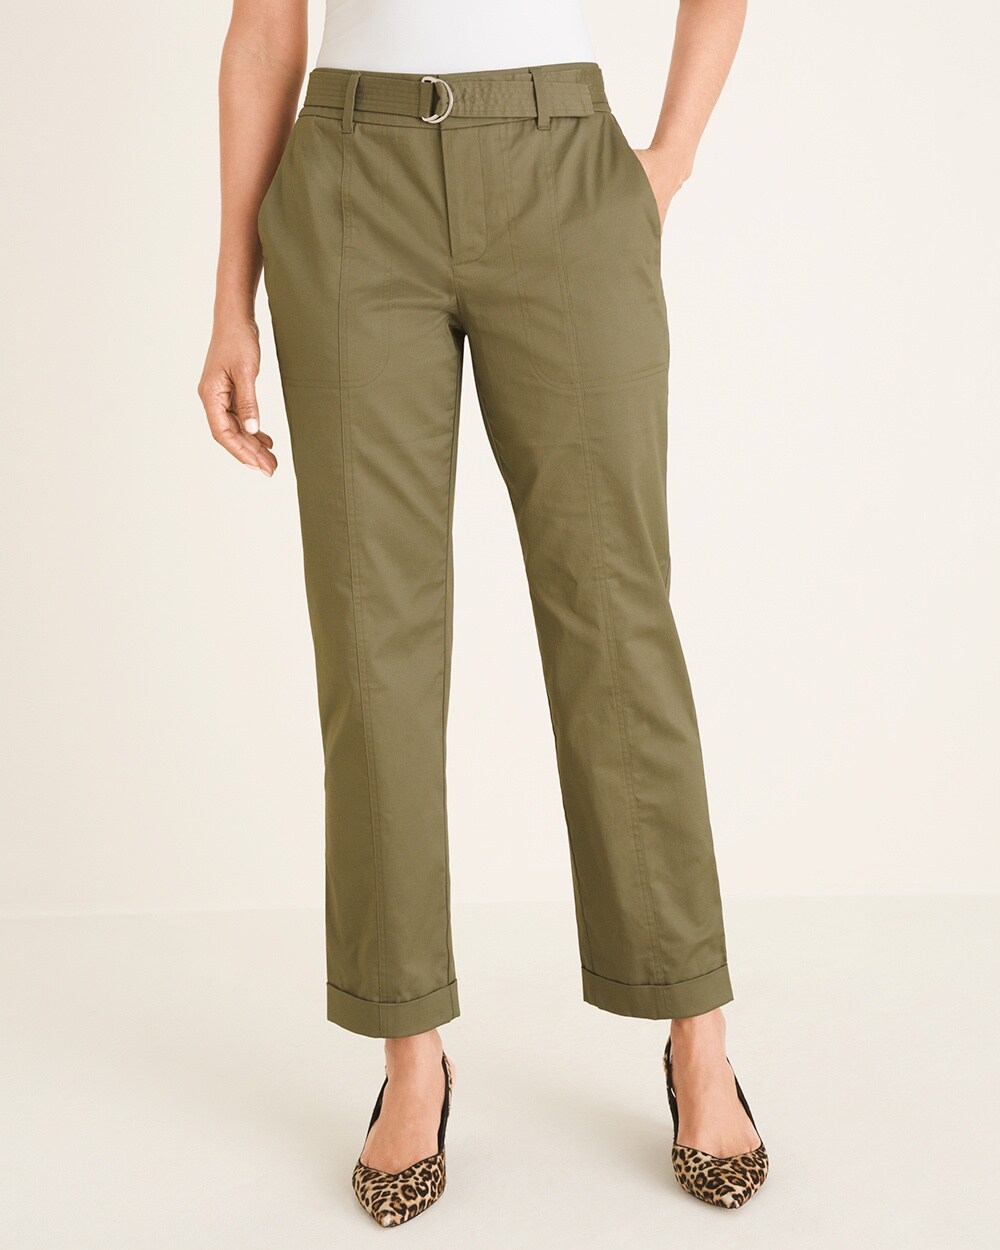 Belted Utility Ankle Pants